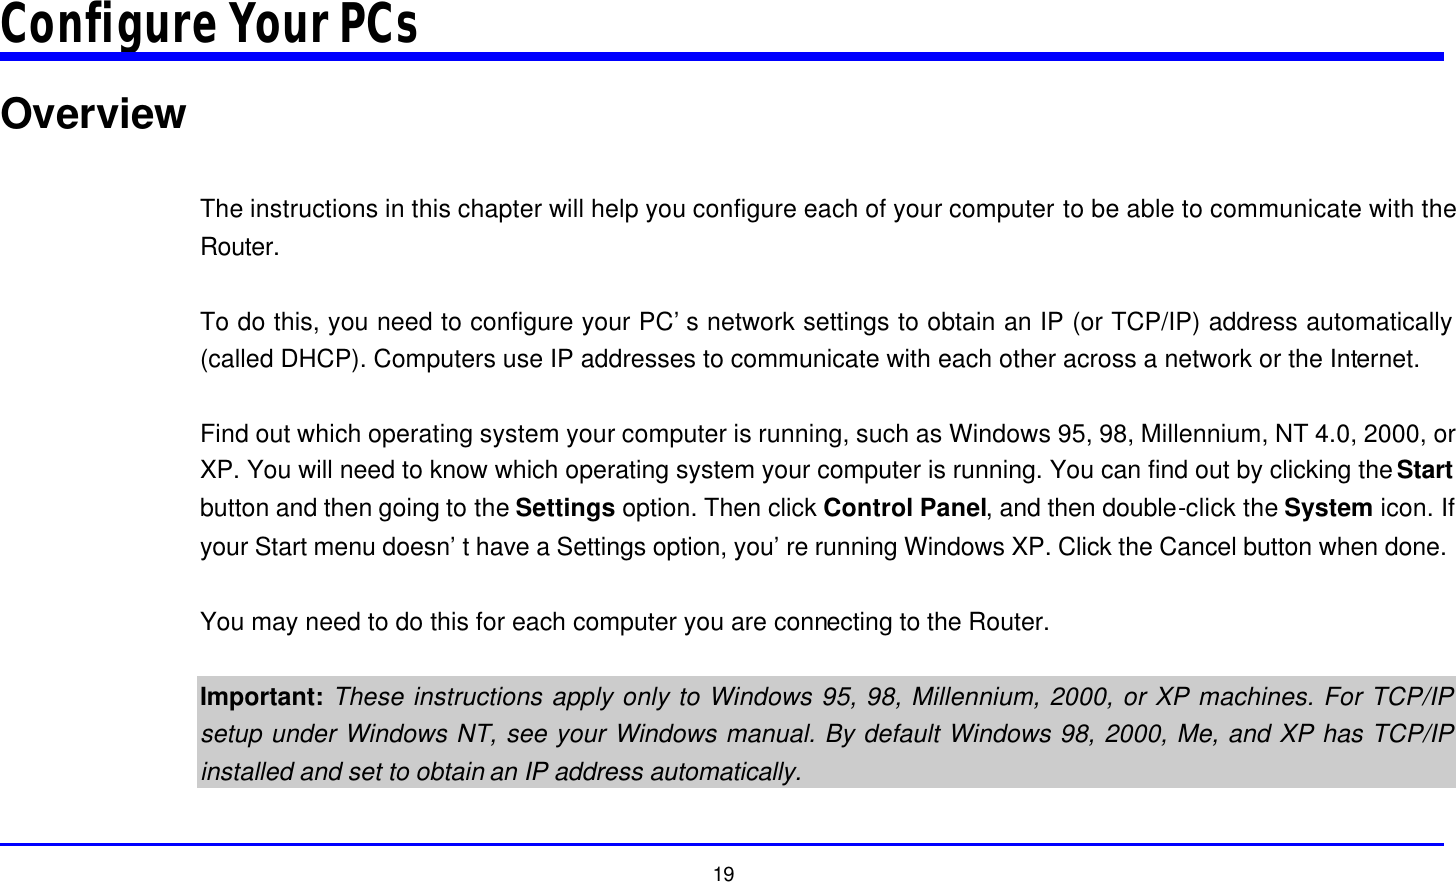  19 Configure Your PCs Overview  The instructions in this chapter will help you configure each of your computer to be able to communicate with the Router.  To do this, you need to configure your PC’s network settings to obtain an IP (or TCP/IP) address automatically (called DHCP). Computers use IP addresses to communicate with each other across a network or the Internet.  Find out which operating system your computer is running, such as Windows 95, 98, Millennium, NT 4.0, 2000, or XP. You will need to know which operating system your computer is running. You can find out by clicking the Start button and then going to the Settings option. Then click Control Panel, and then double-click the System icon. If your Start menu doesn’t have a Settings option, you’re running Windows XP. Click the Cancel button when done.  You may need to do this for each computer you are connecting to the Router.  Important: These instructions apply only to Windows 95, 98, Millennium, 2000, or XP machines. For TCP/IP setup under Windows NT, see your Windows manual. By default Windows 98, 2000, Me, and XP has TCP/IP installed and set to obtain an IP address automatically.  